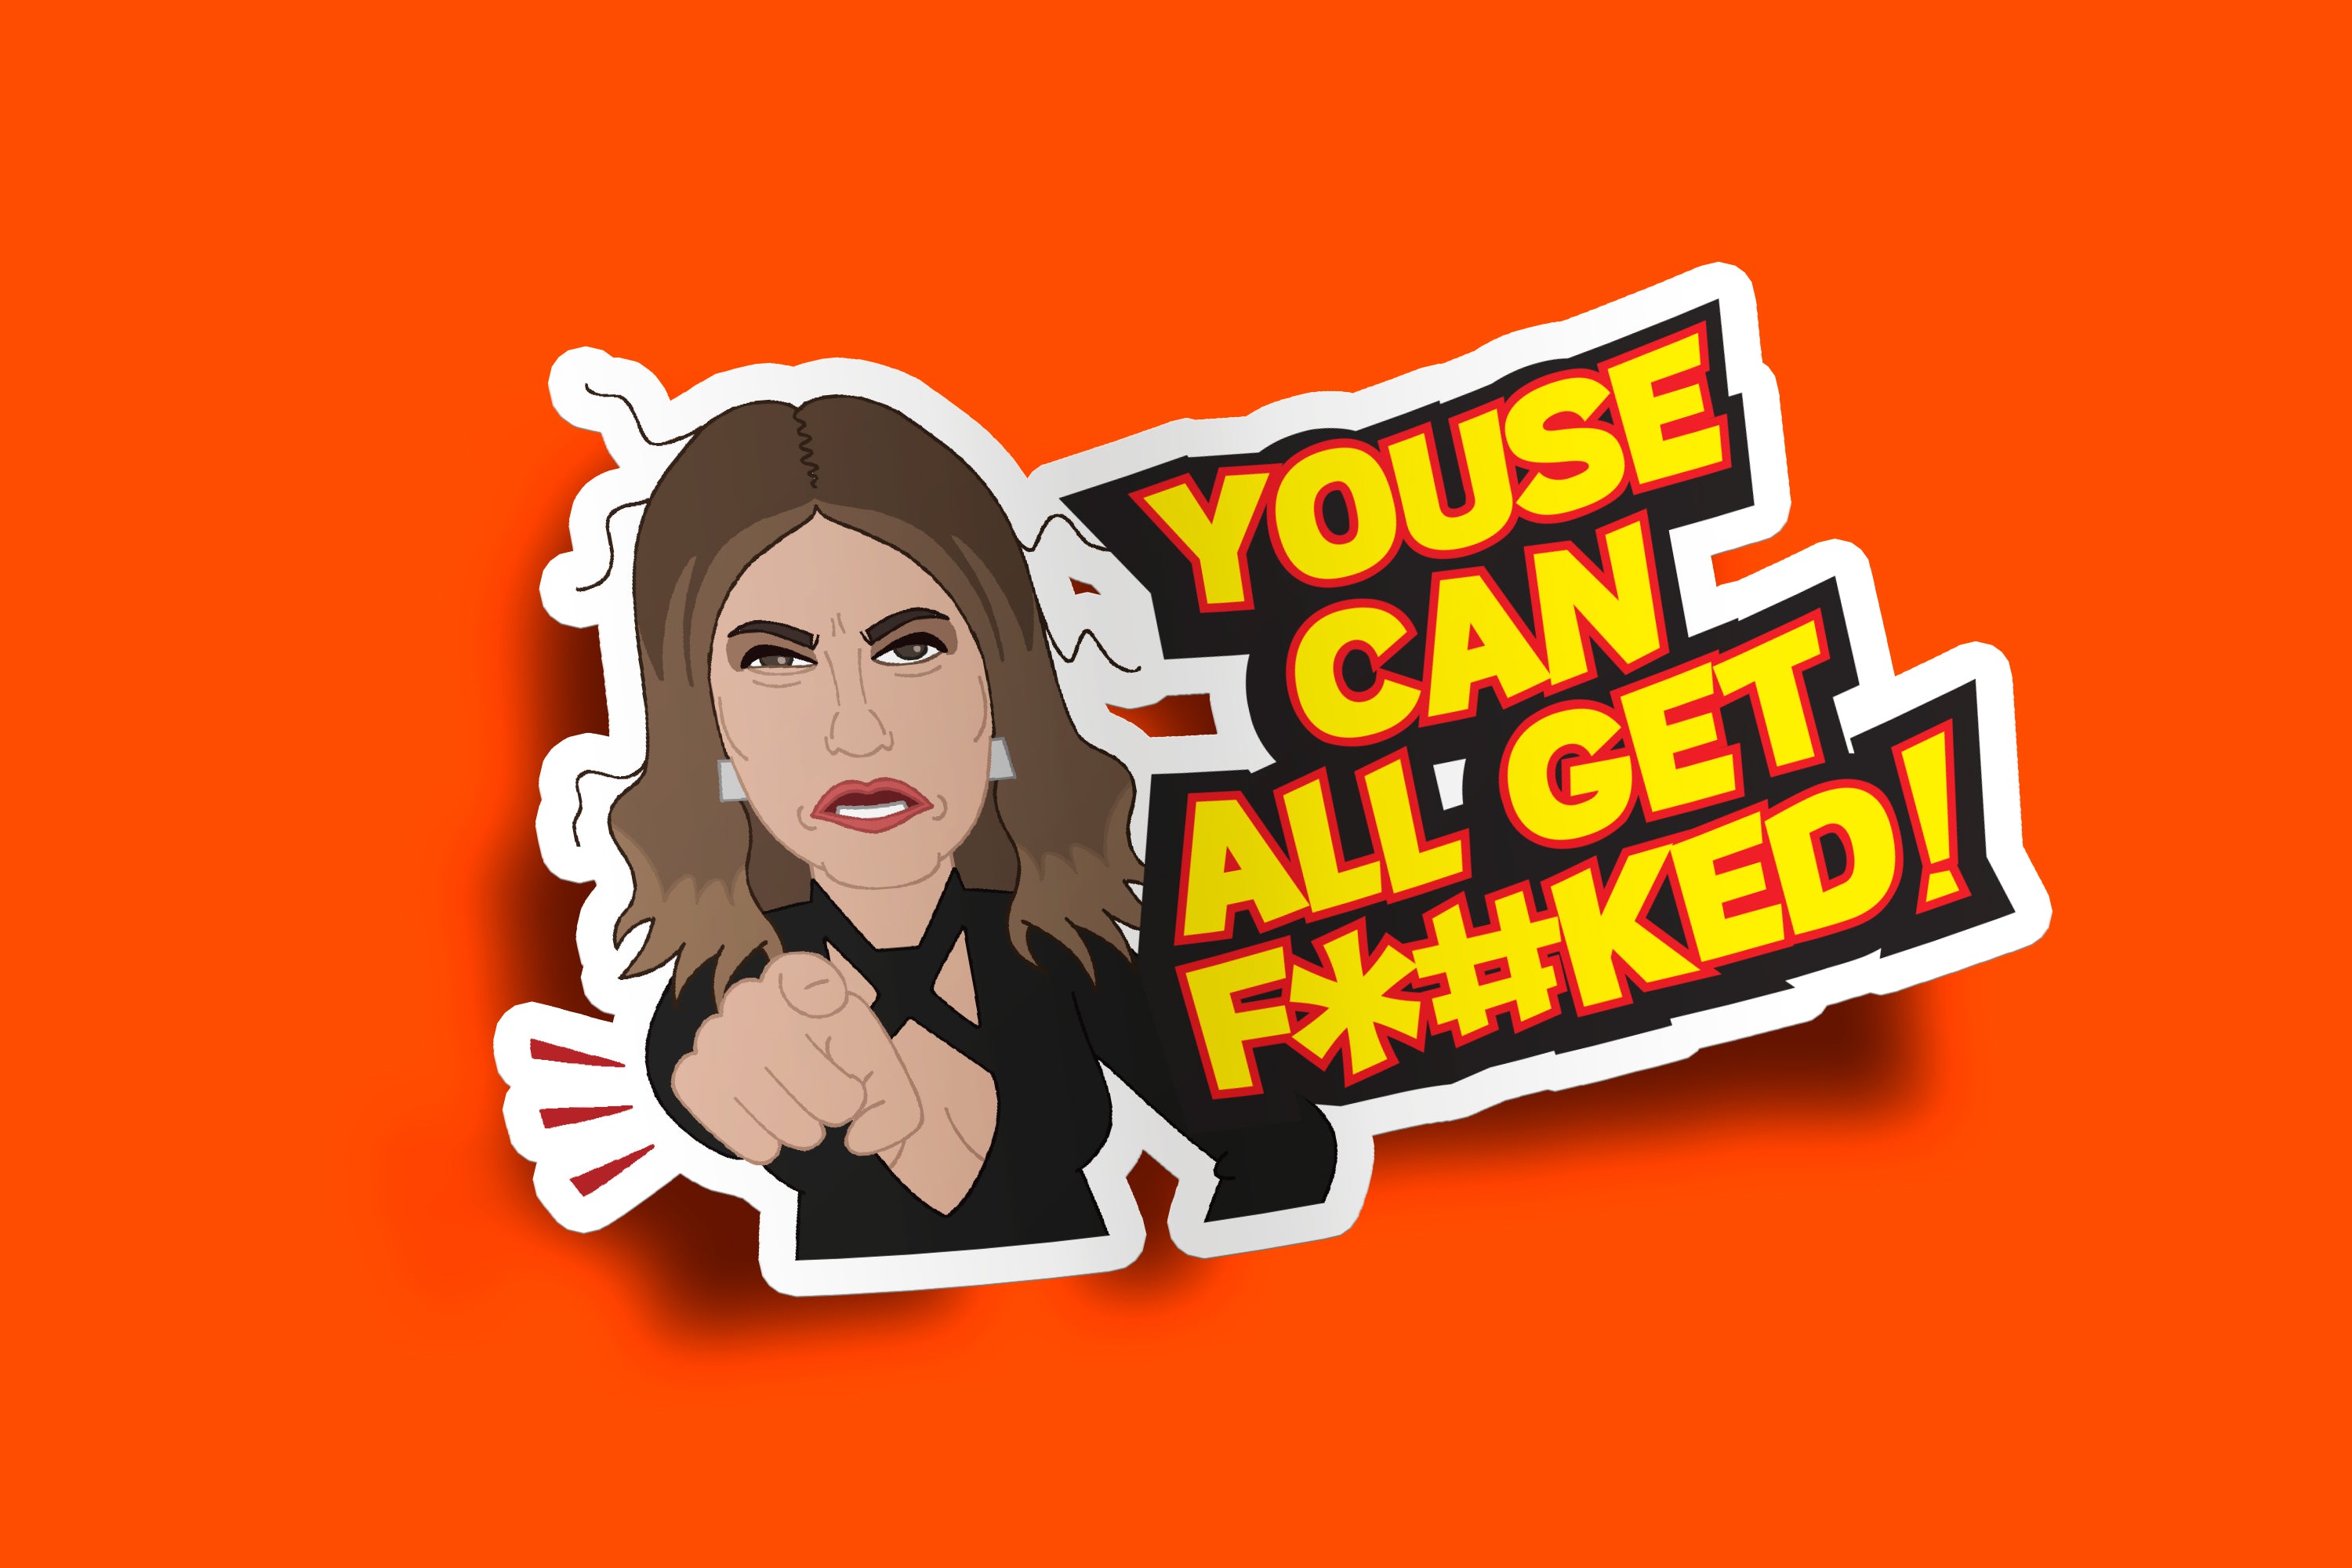 "Youse Can All Get F**ked" Lidia Stickers